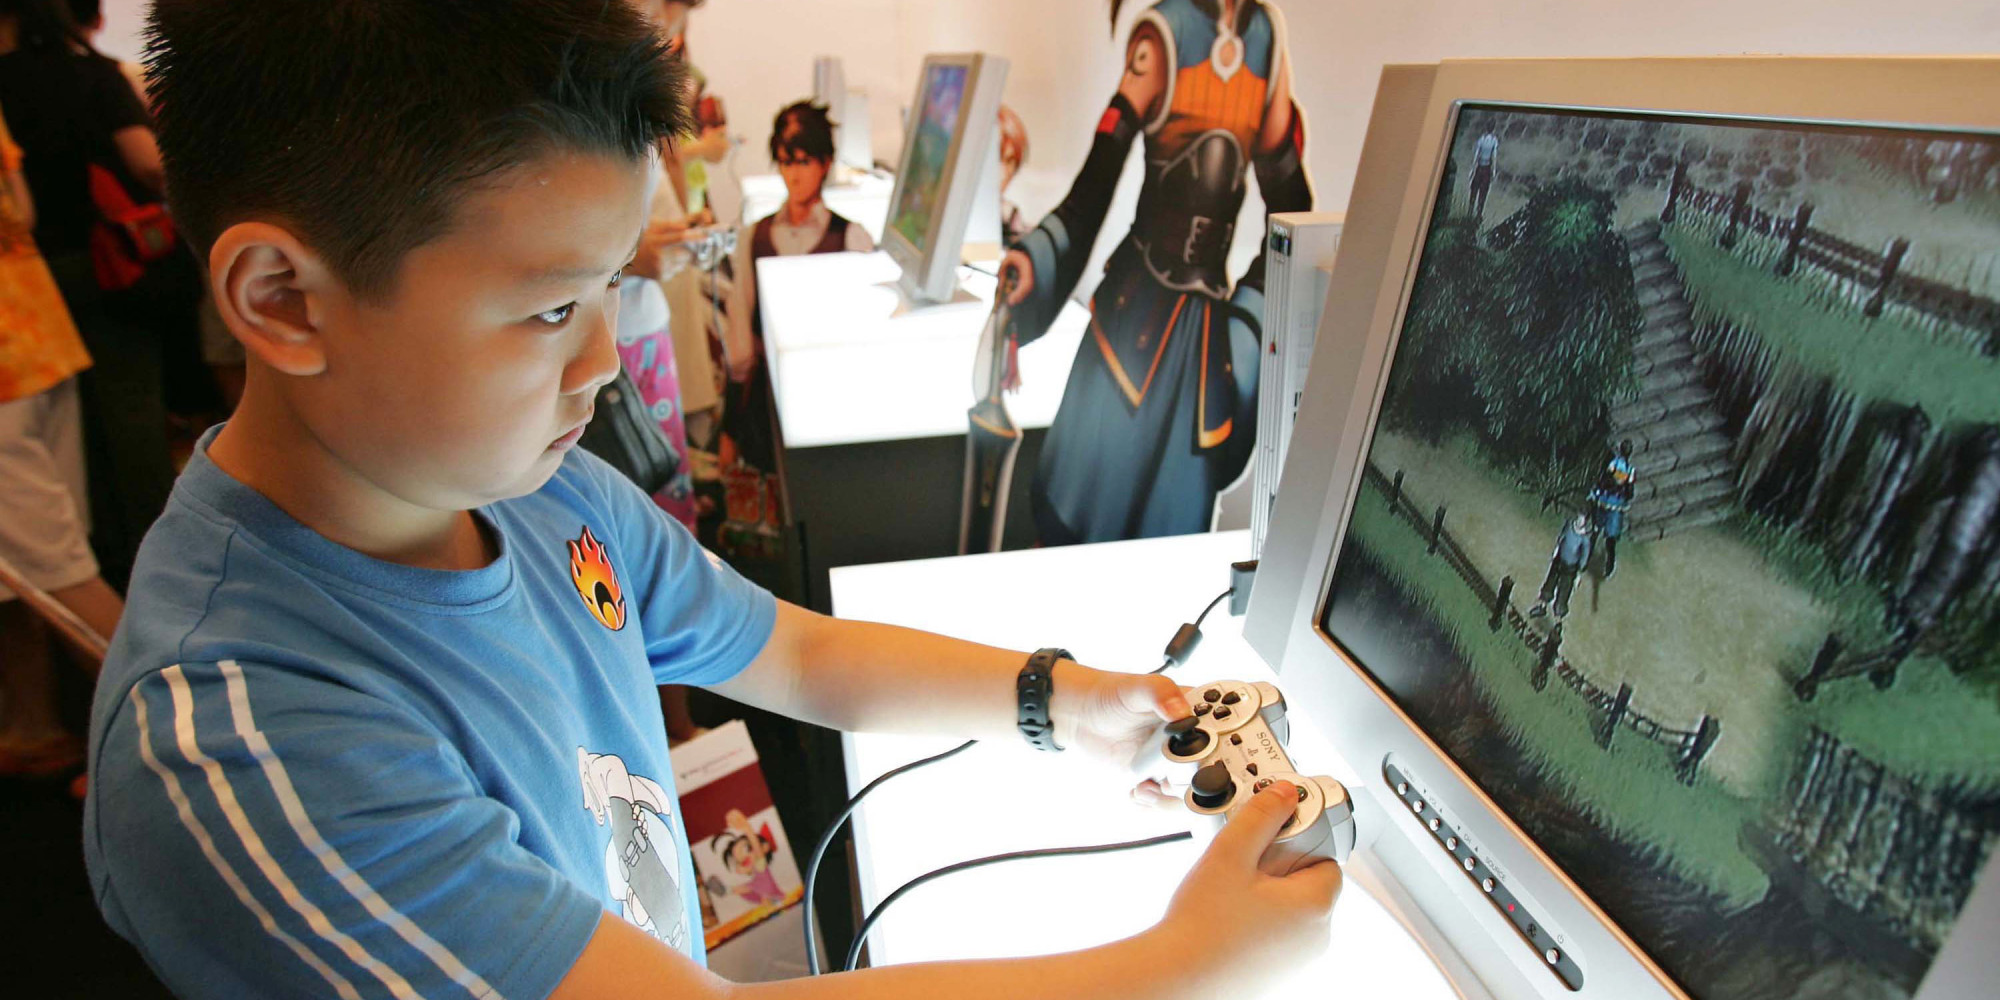 SHANGHAI, CHINA - JUNE 30: (CHINA OUT)  A young boy plays Sony's Playstation 2 video game system at the 2005 Shanghai Animation FairJune 30, 2005 in Shanghai, China. China has a population of 370 million children and young people, making up a huge audience for cartoons and animation. Currently, 90 percent of the market is dominated by foreign producers from Japan and the U.S., with the largest share going to Japan. Most domestic cartoons are criticized for being old-fashioned and lackluster due to little originality in story and characters, dryness of content and persistent educational flavor.  (Photo by China Photos/Getty Images)